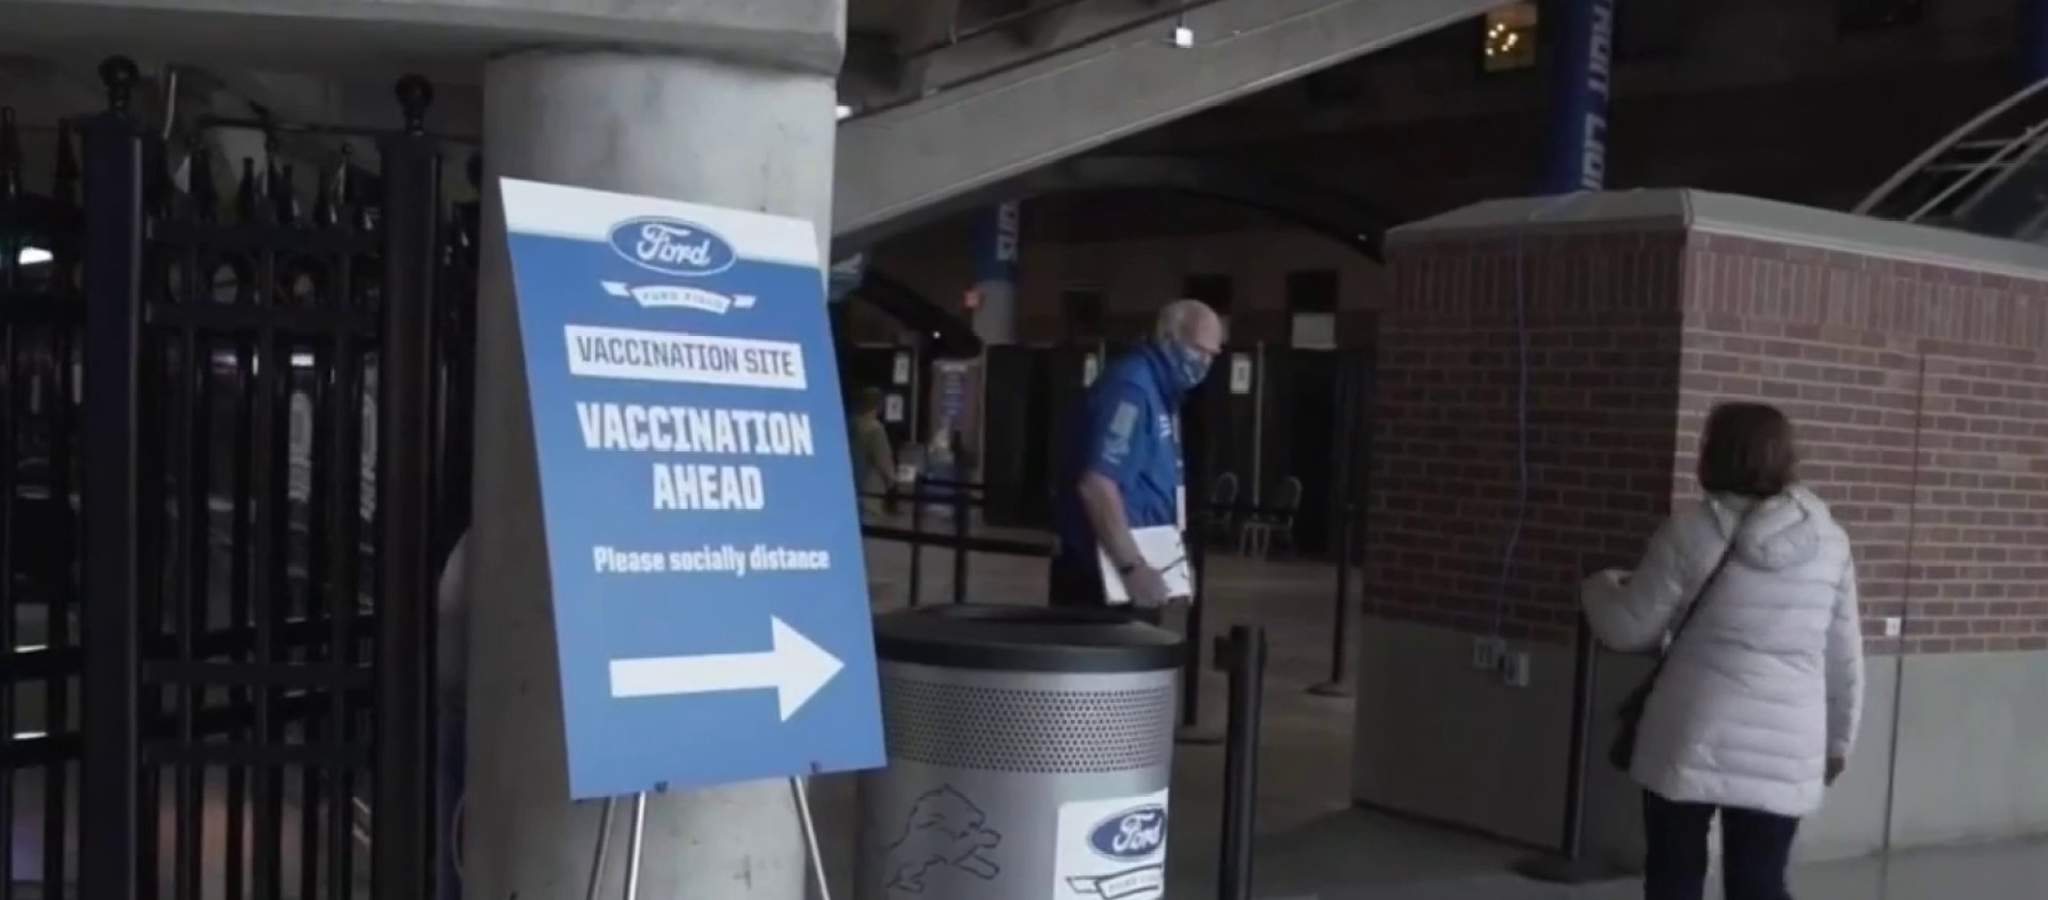 Ford Field COVID mass vaccination site prepared to open to thousands